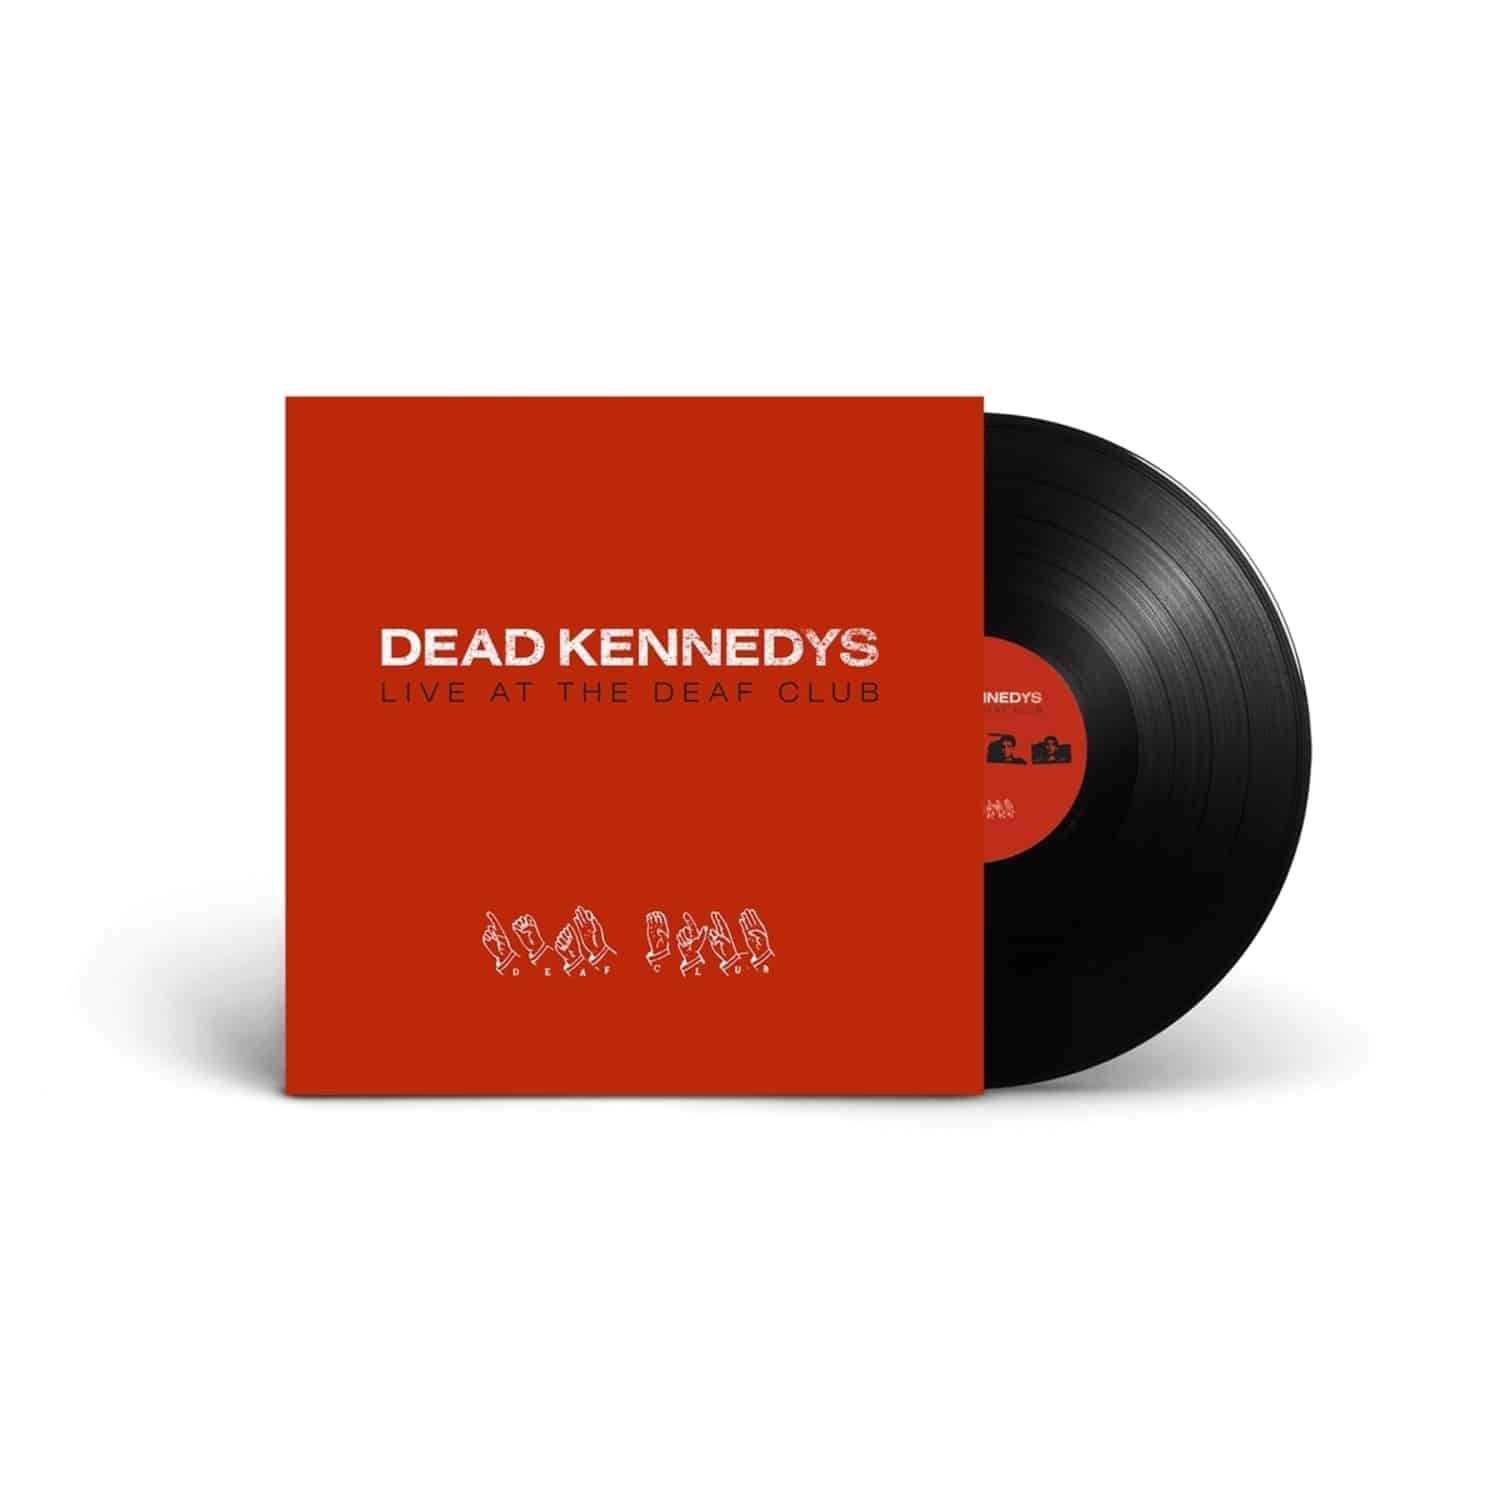 Dead Kennedys - LIVE AT THE DEAF CLUB 